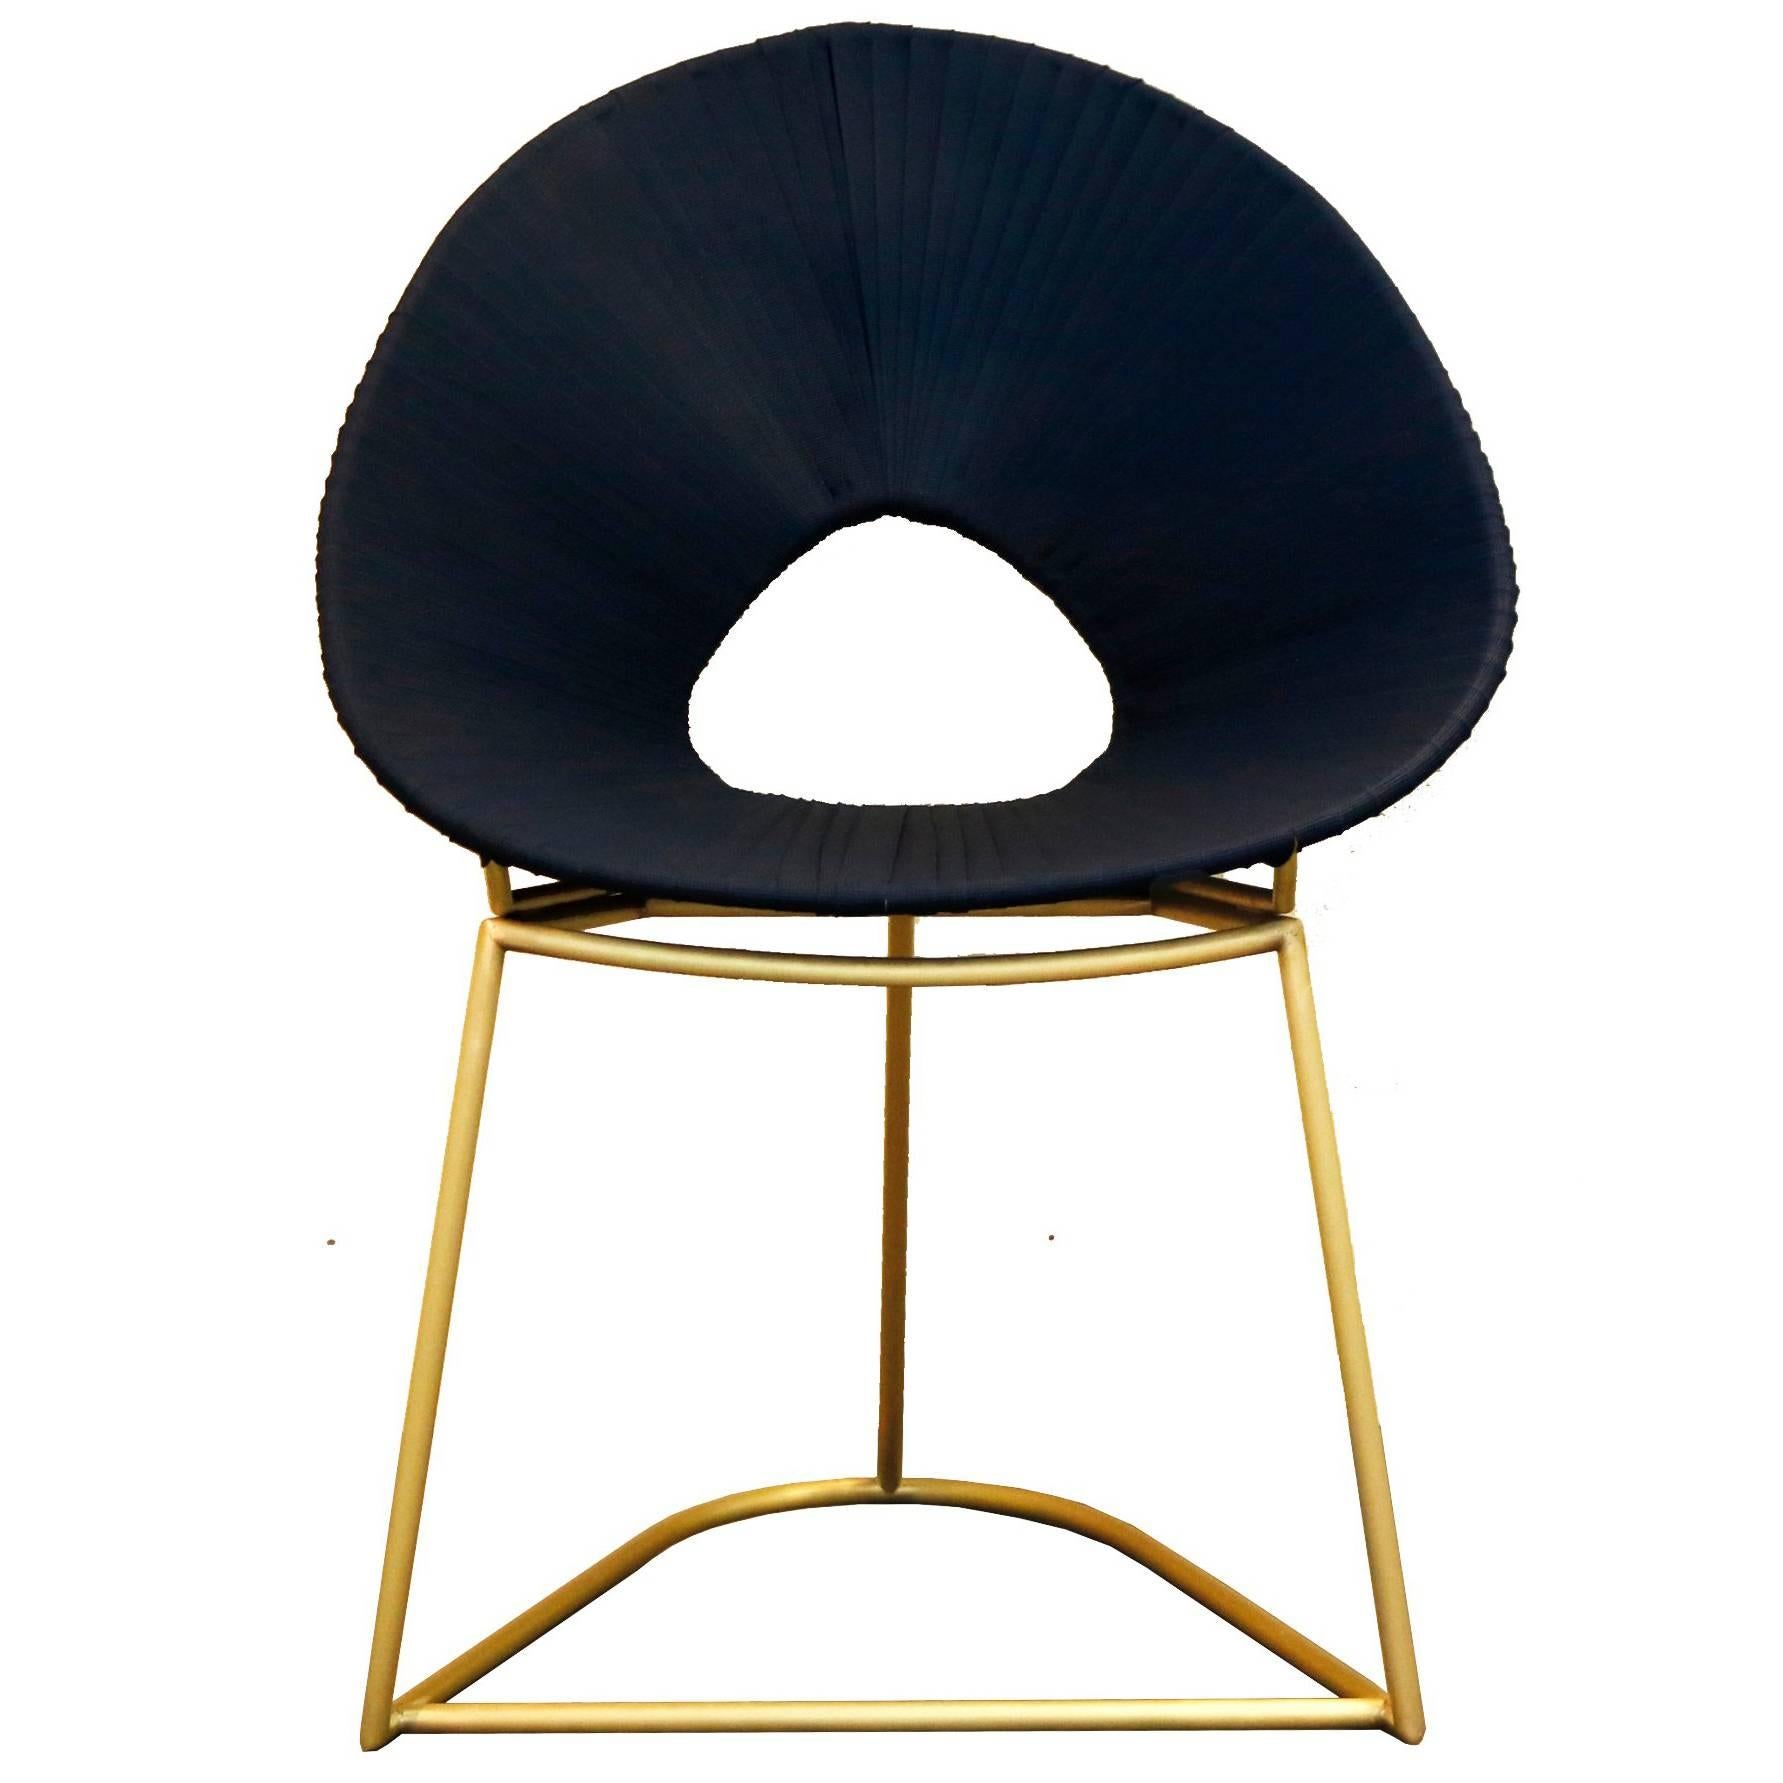 Cacique Chair, Brass Limited Edition - Contemporary Outdoor Furniture Design For Sale